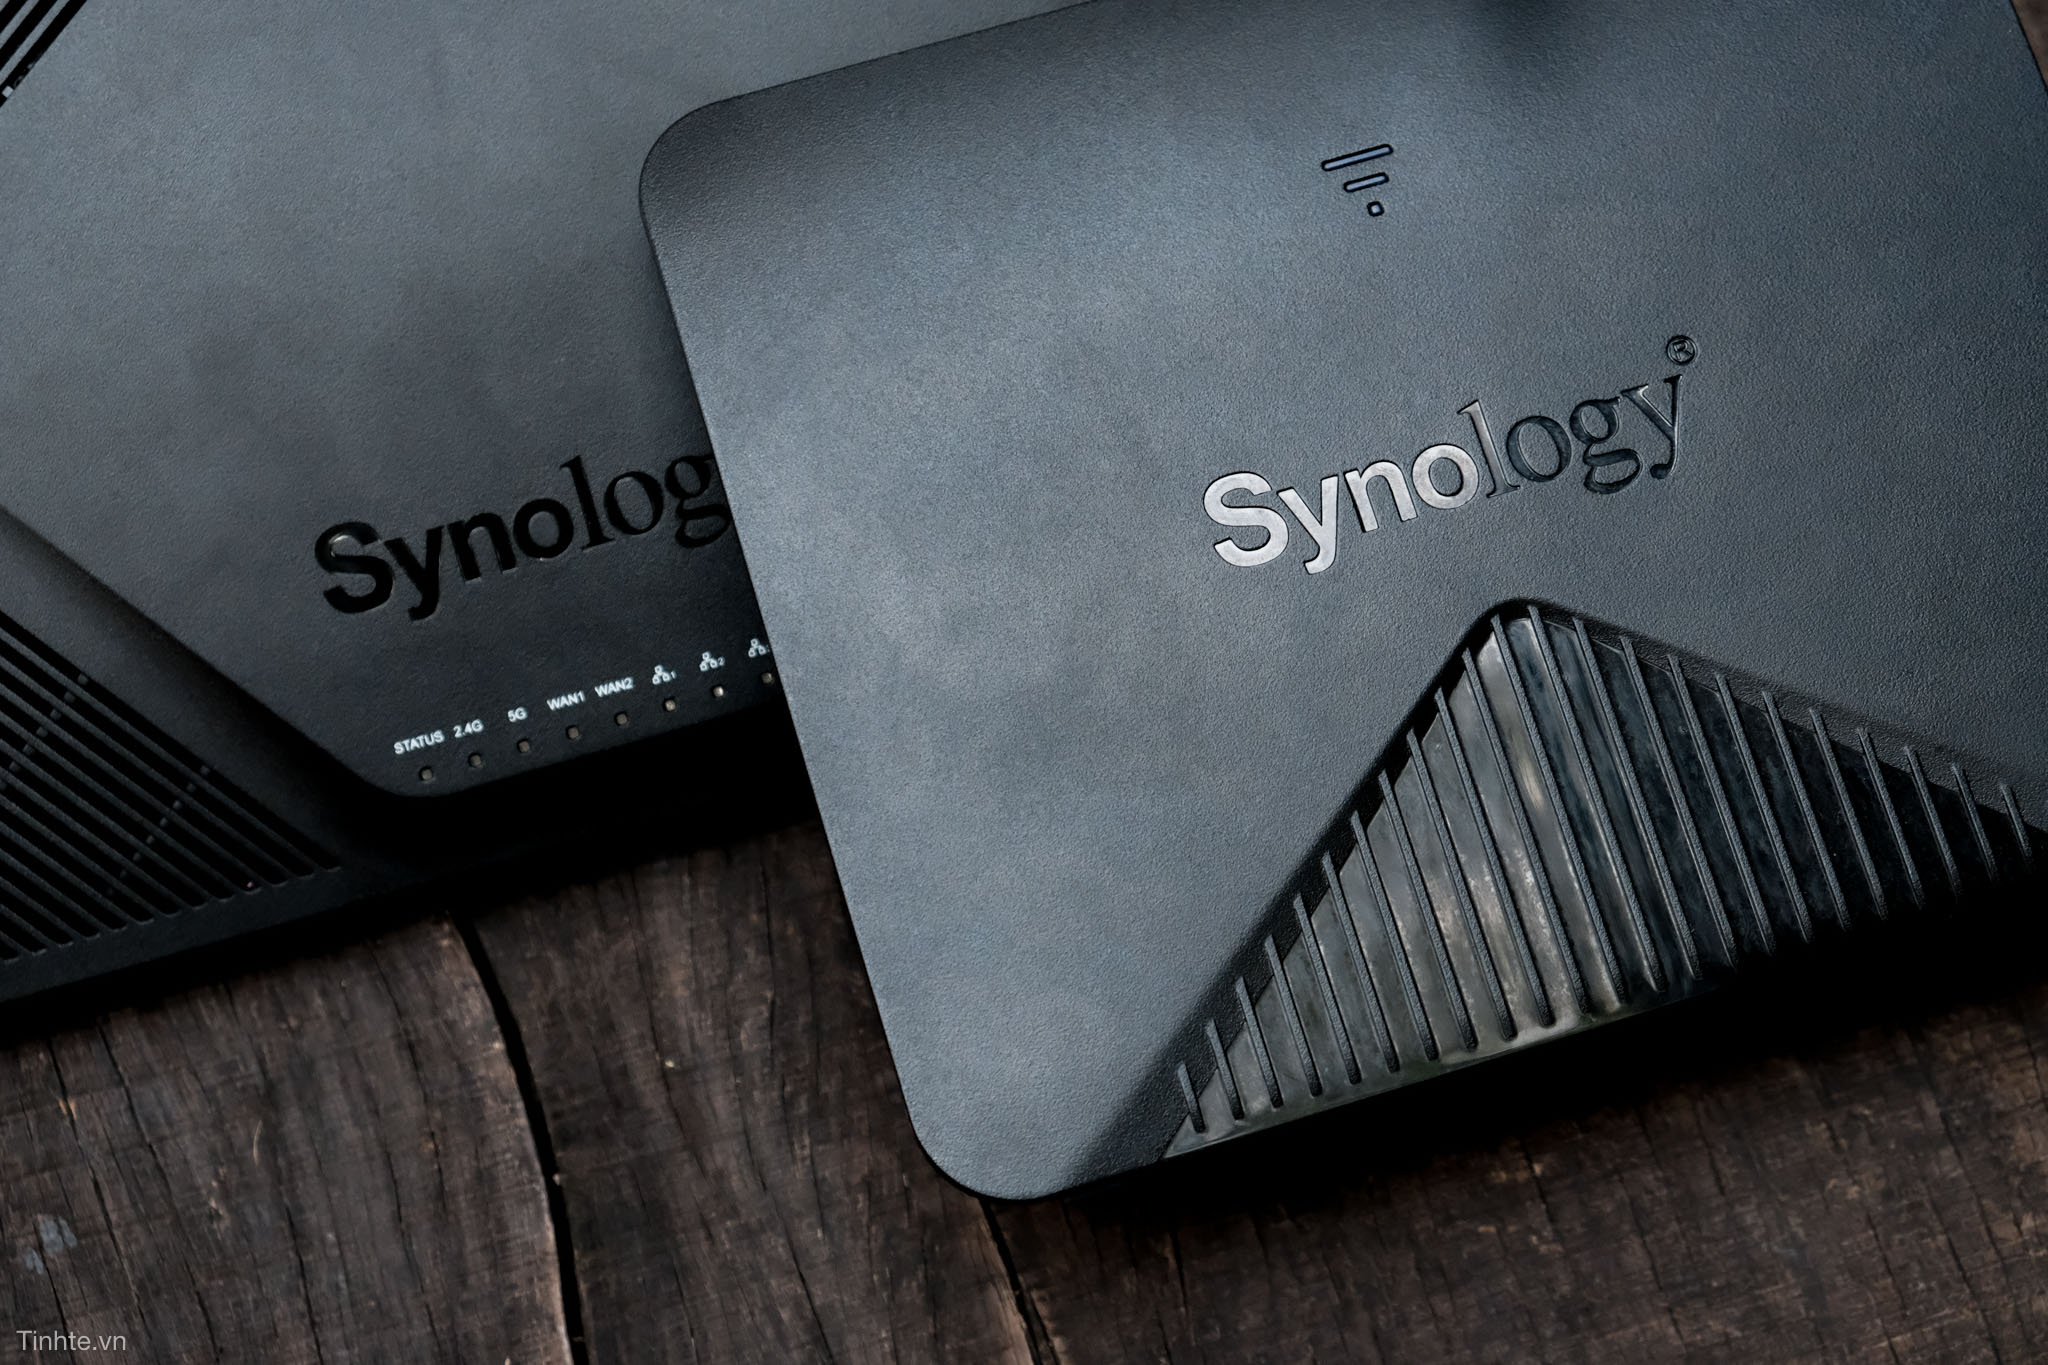 synology_router_tinhte_3-2.jpg